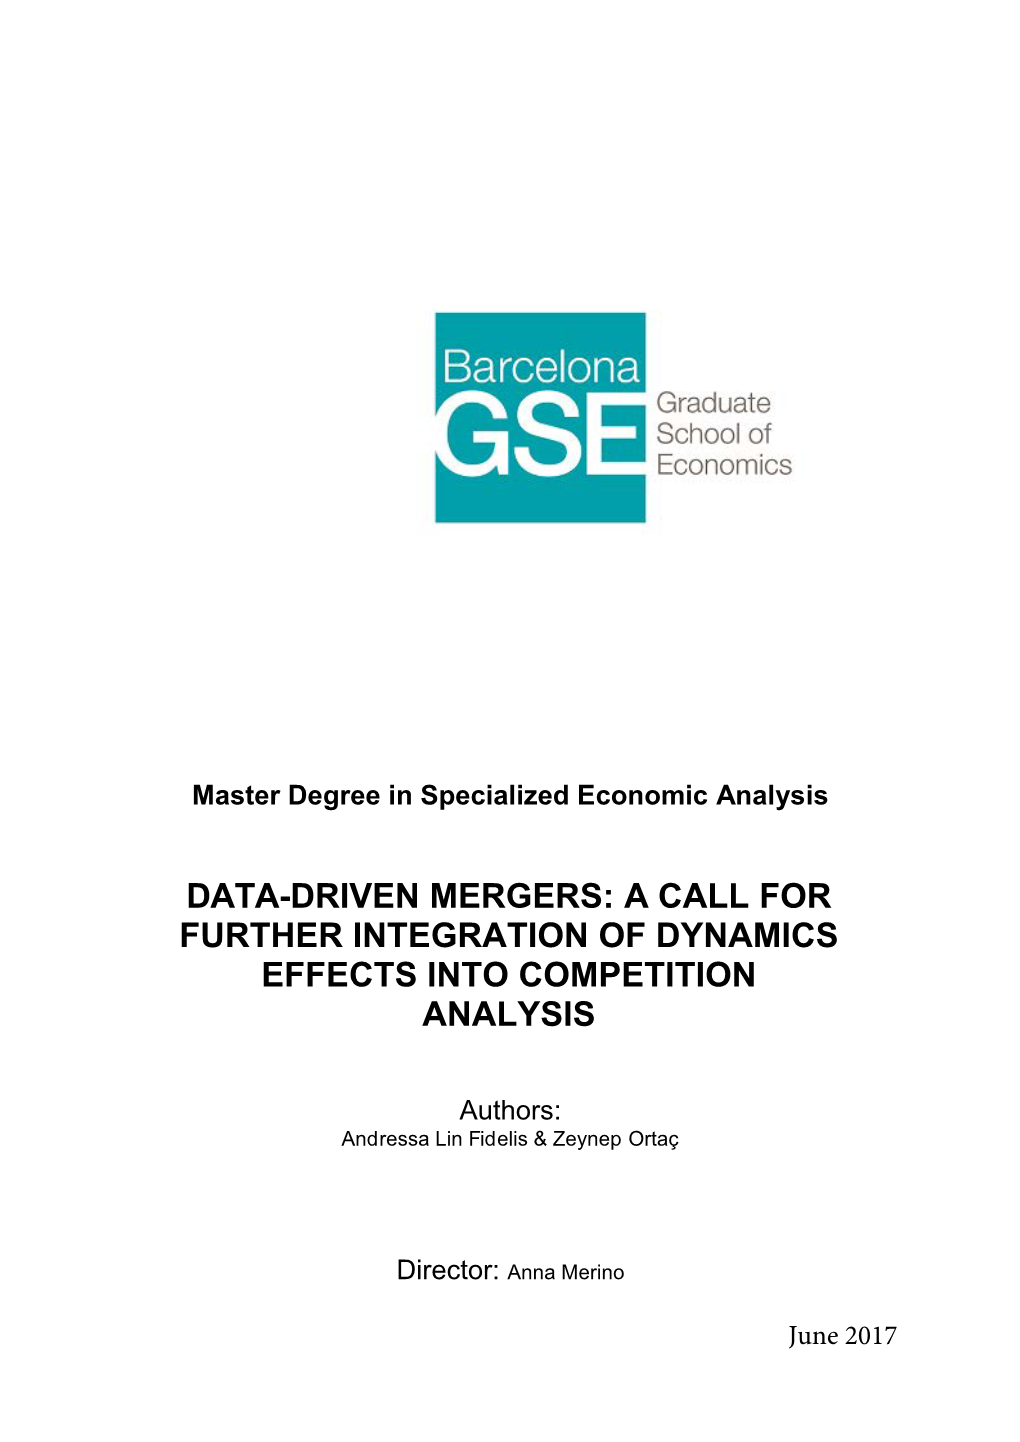 Data-Driven Mergers: a Call for Further Integration of Dynamics Effects Into Competition Analysis